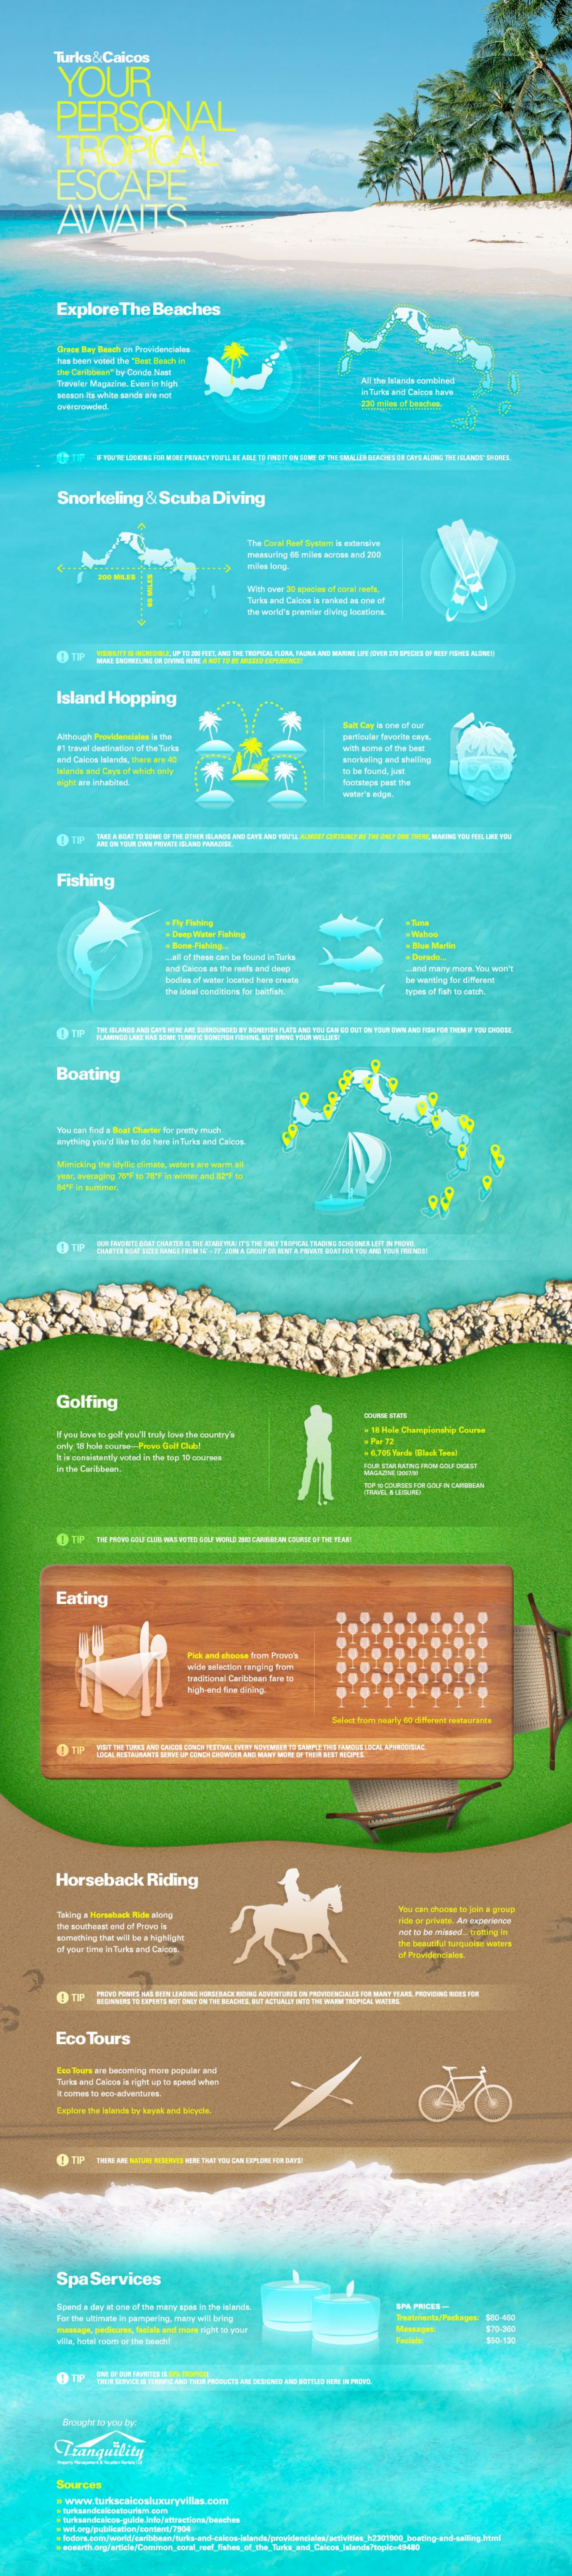 Turks & Caicos Beach Vacations Infographic